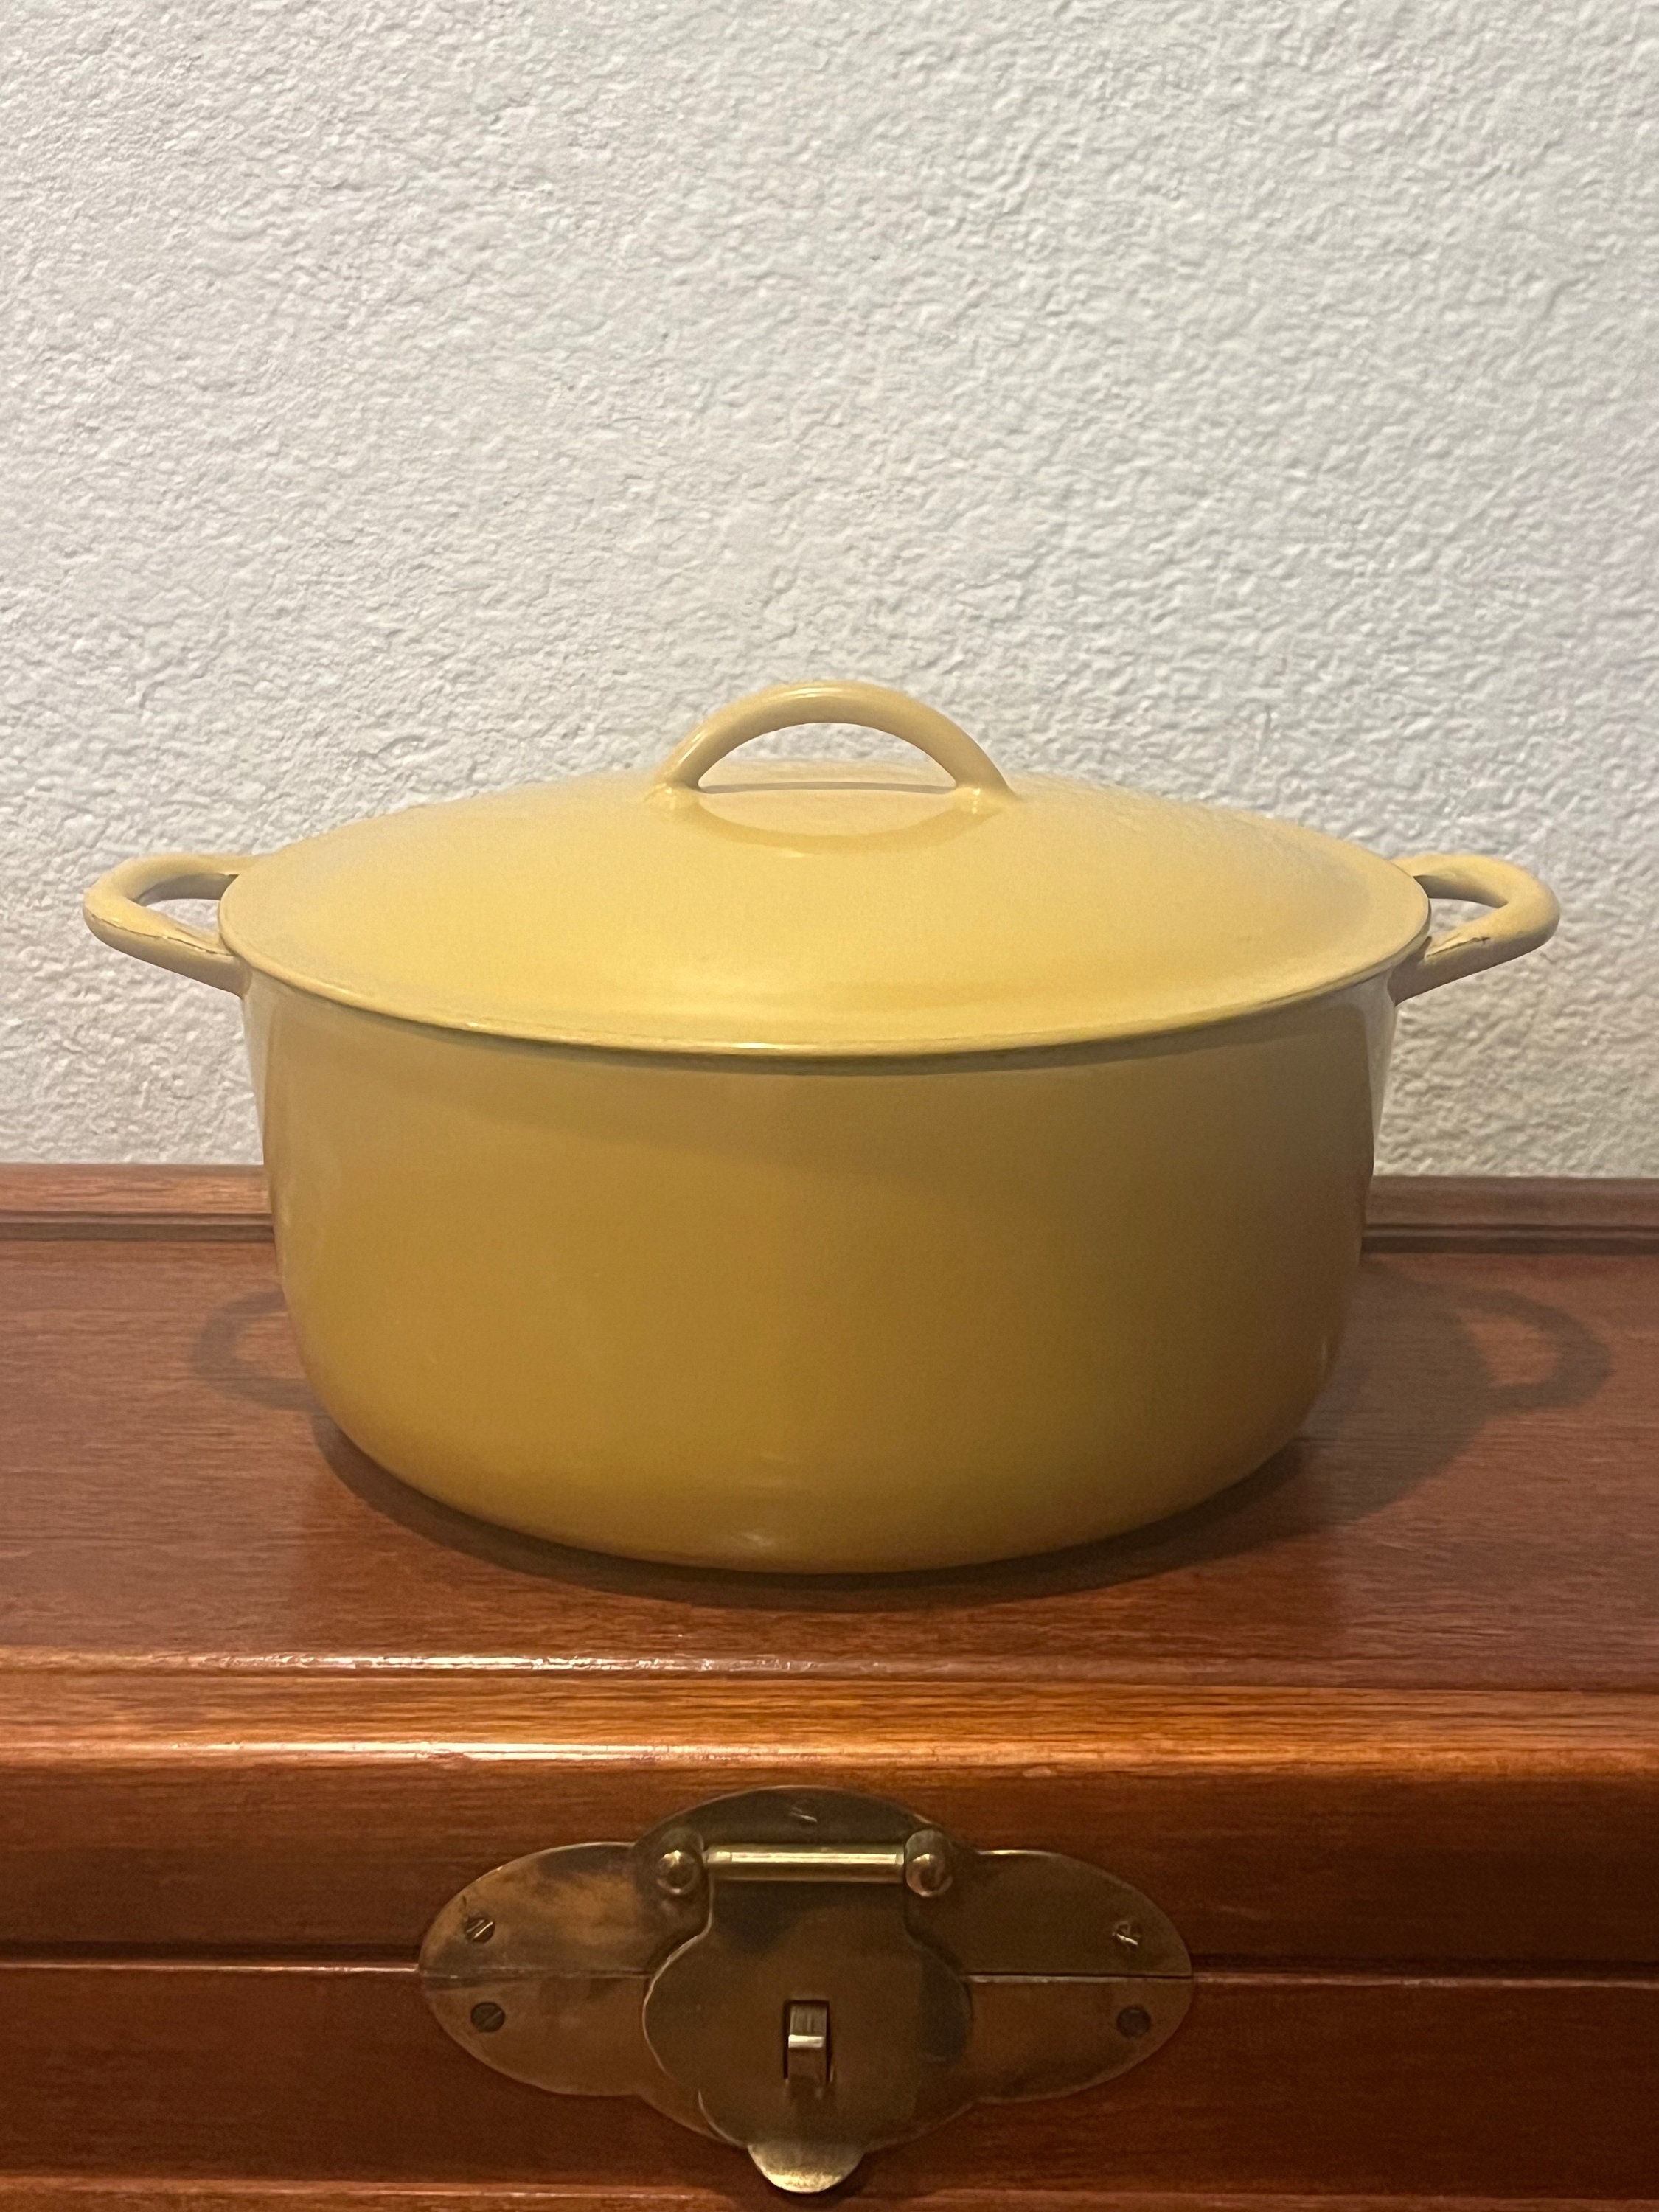 Dutch Ovens for sale in Pittsburgh, Pennsylvania